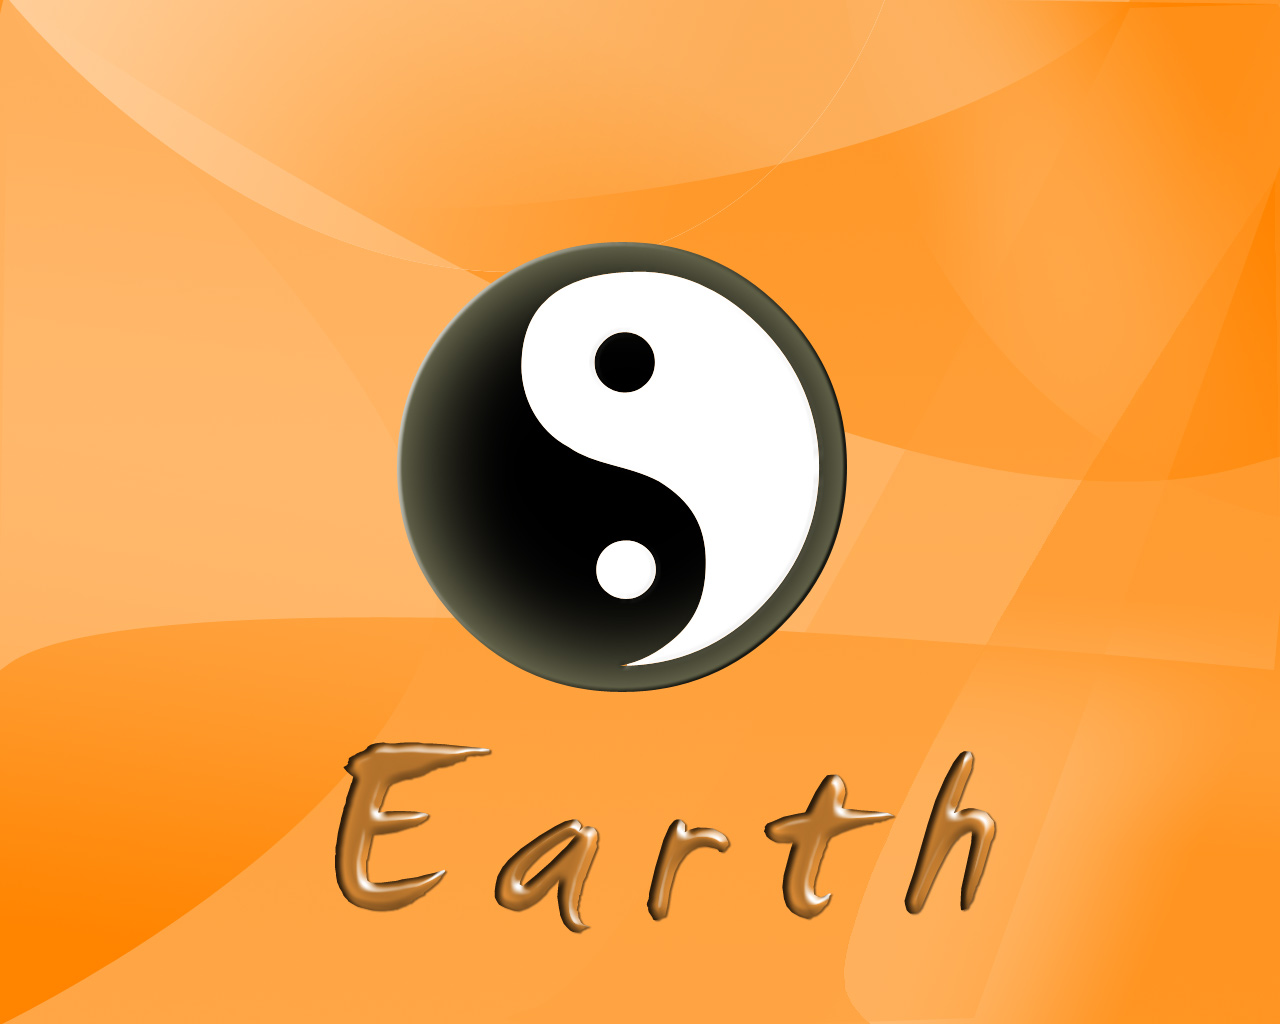 Earth feng shui wallpapers Feng Shui Doctrine articles and e books